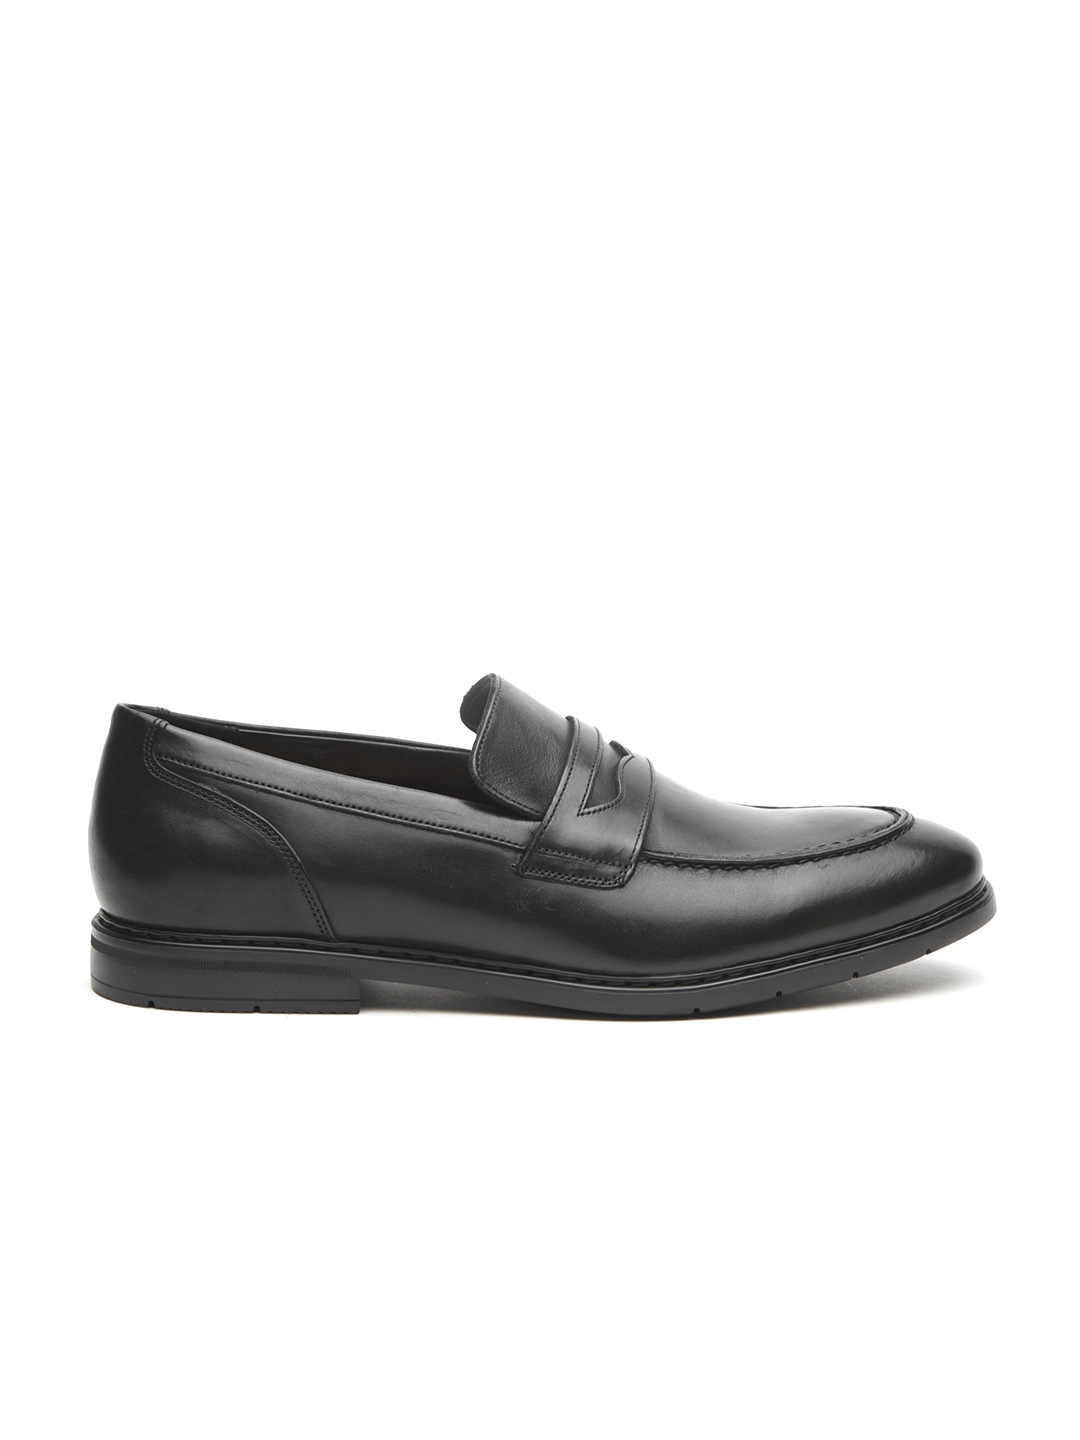 Buy Clarks Black Leather Loafers - Formal Shoes for 2580915 | Myntra